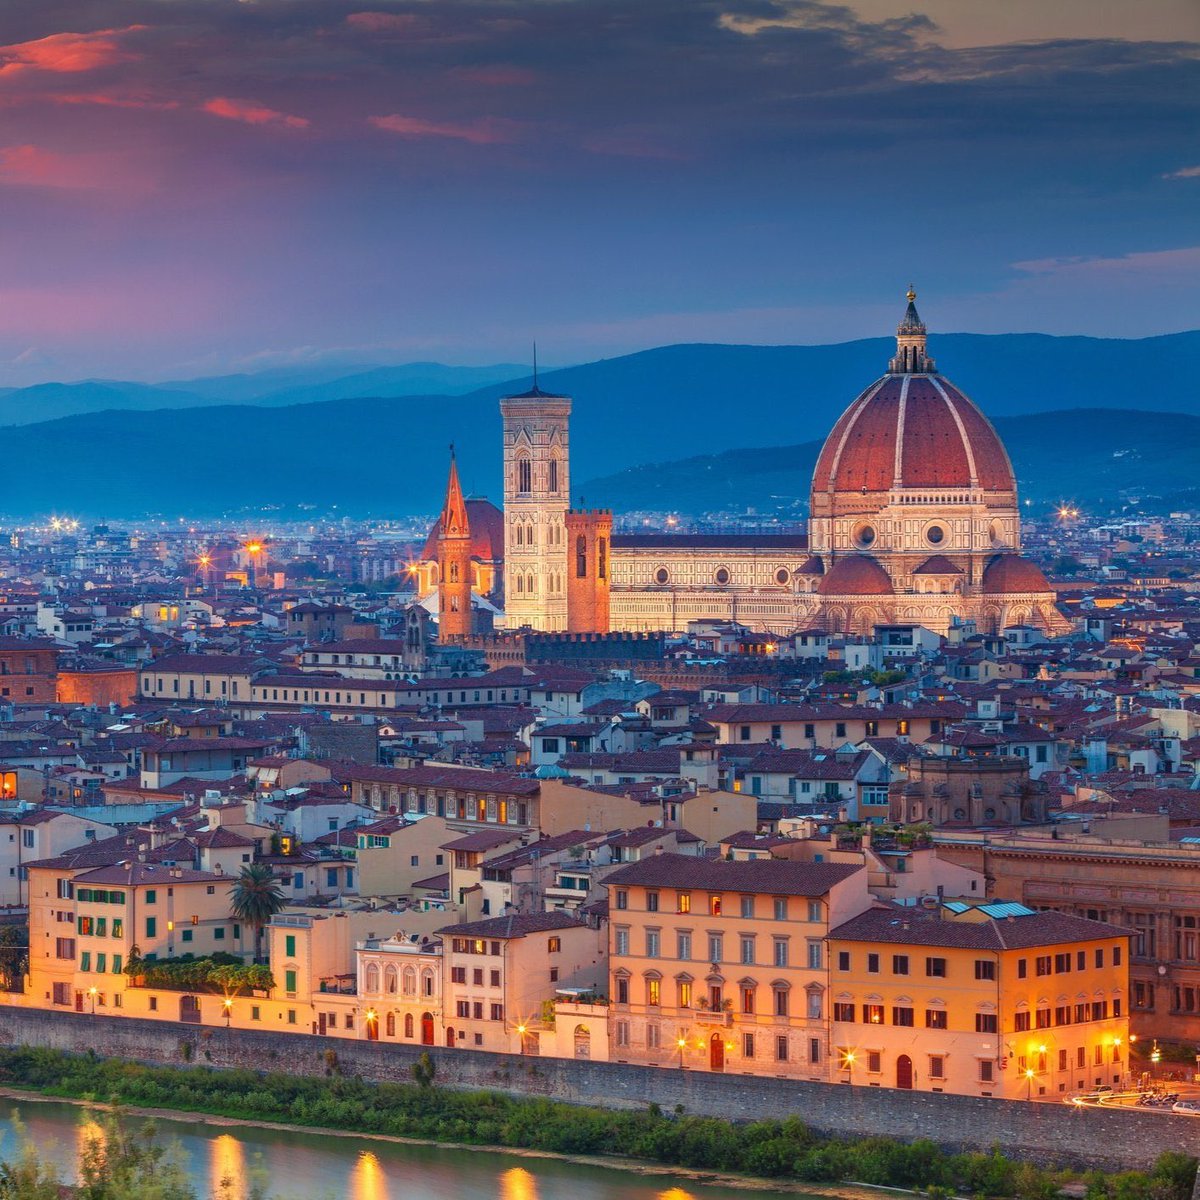 🇮🇹 **'Discover Italy's magic: blend art and nature in your itinerary! From Rome's Colosseum to Tuscany's rolling hills, immerse yourself in beauty. 🎨🌿 #ItalyTravel'** 🇮🇹